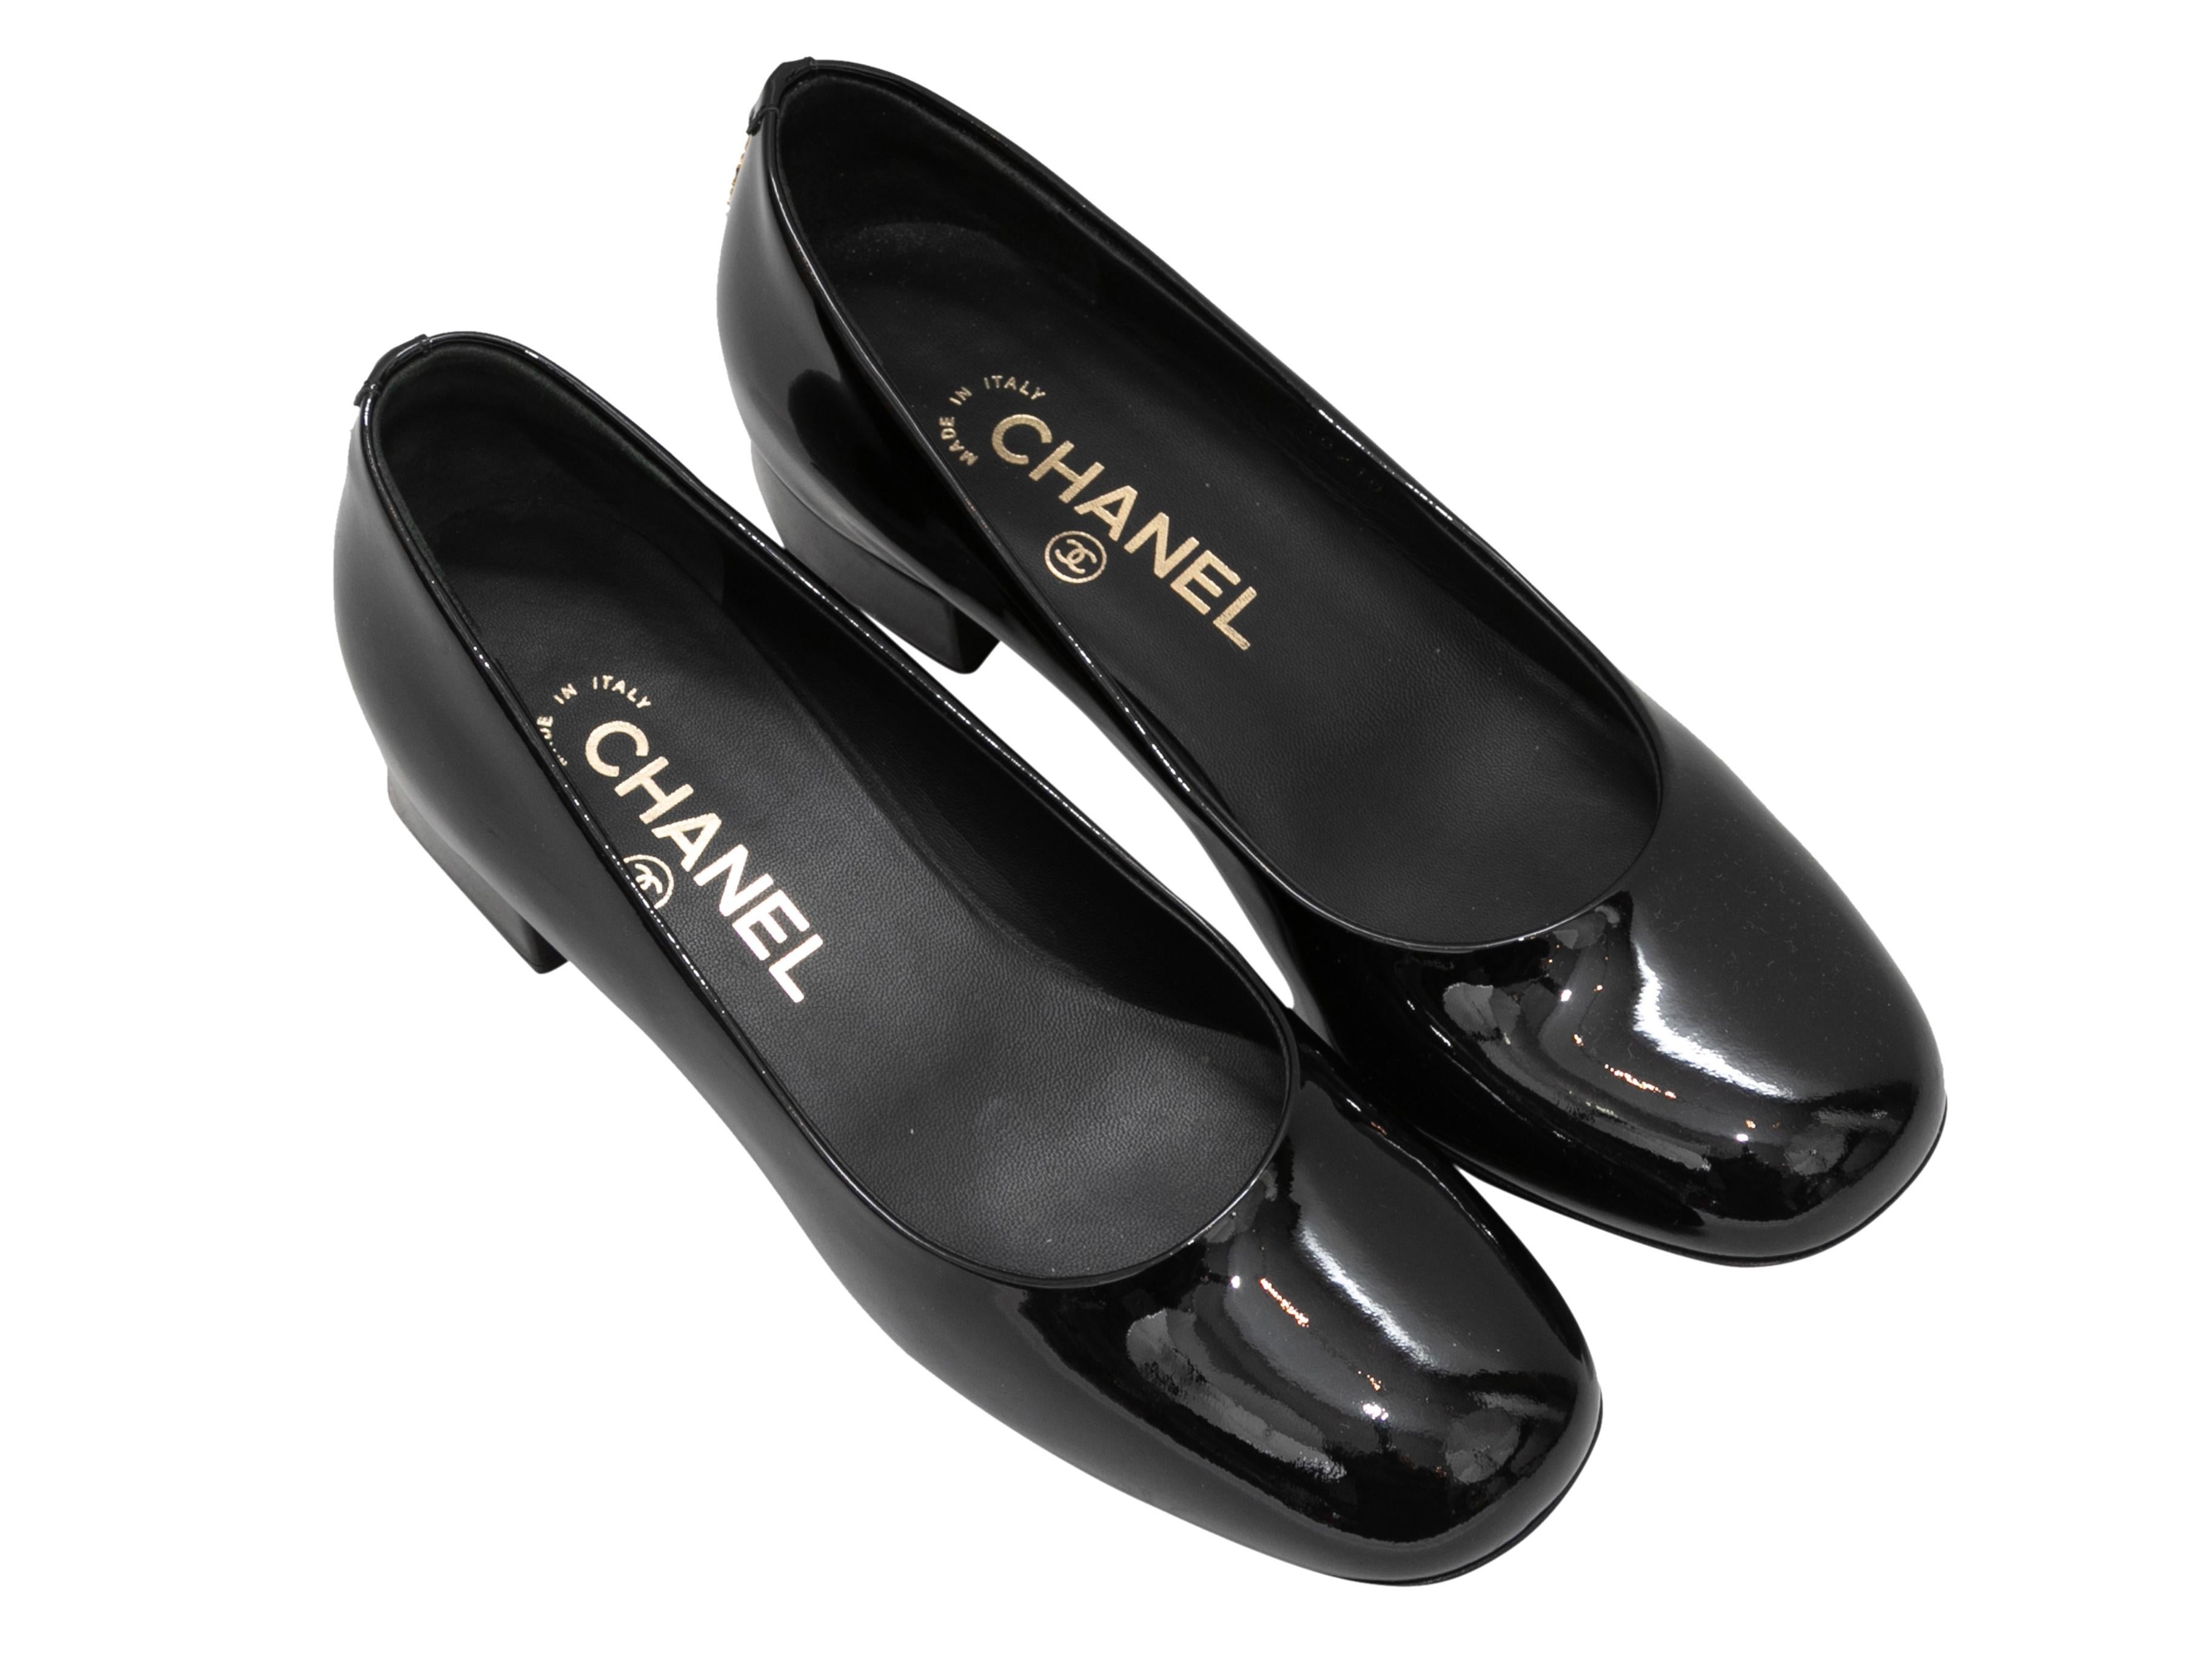 Black patent leather low block heel pumps by Chanel. 1.25